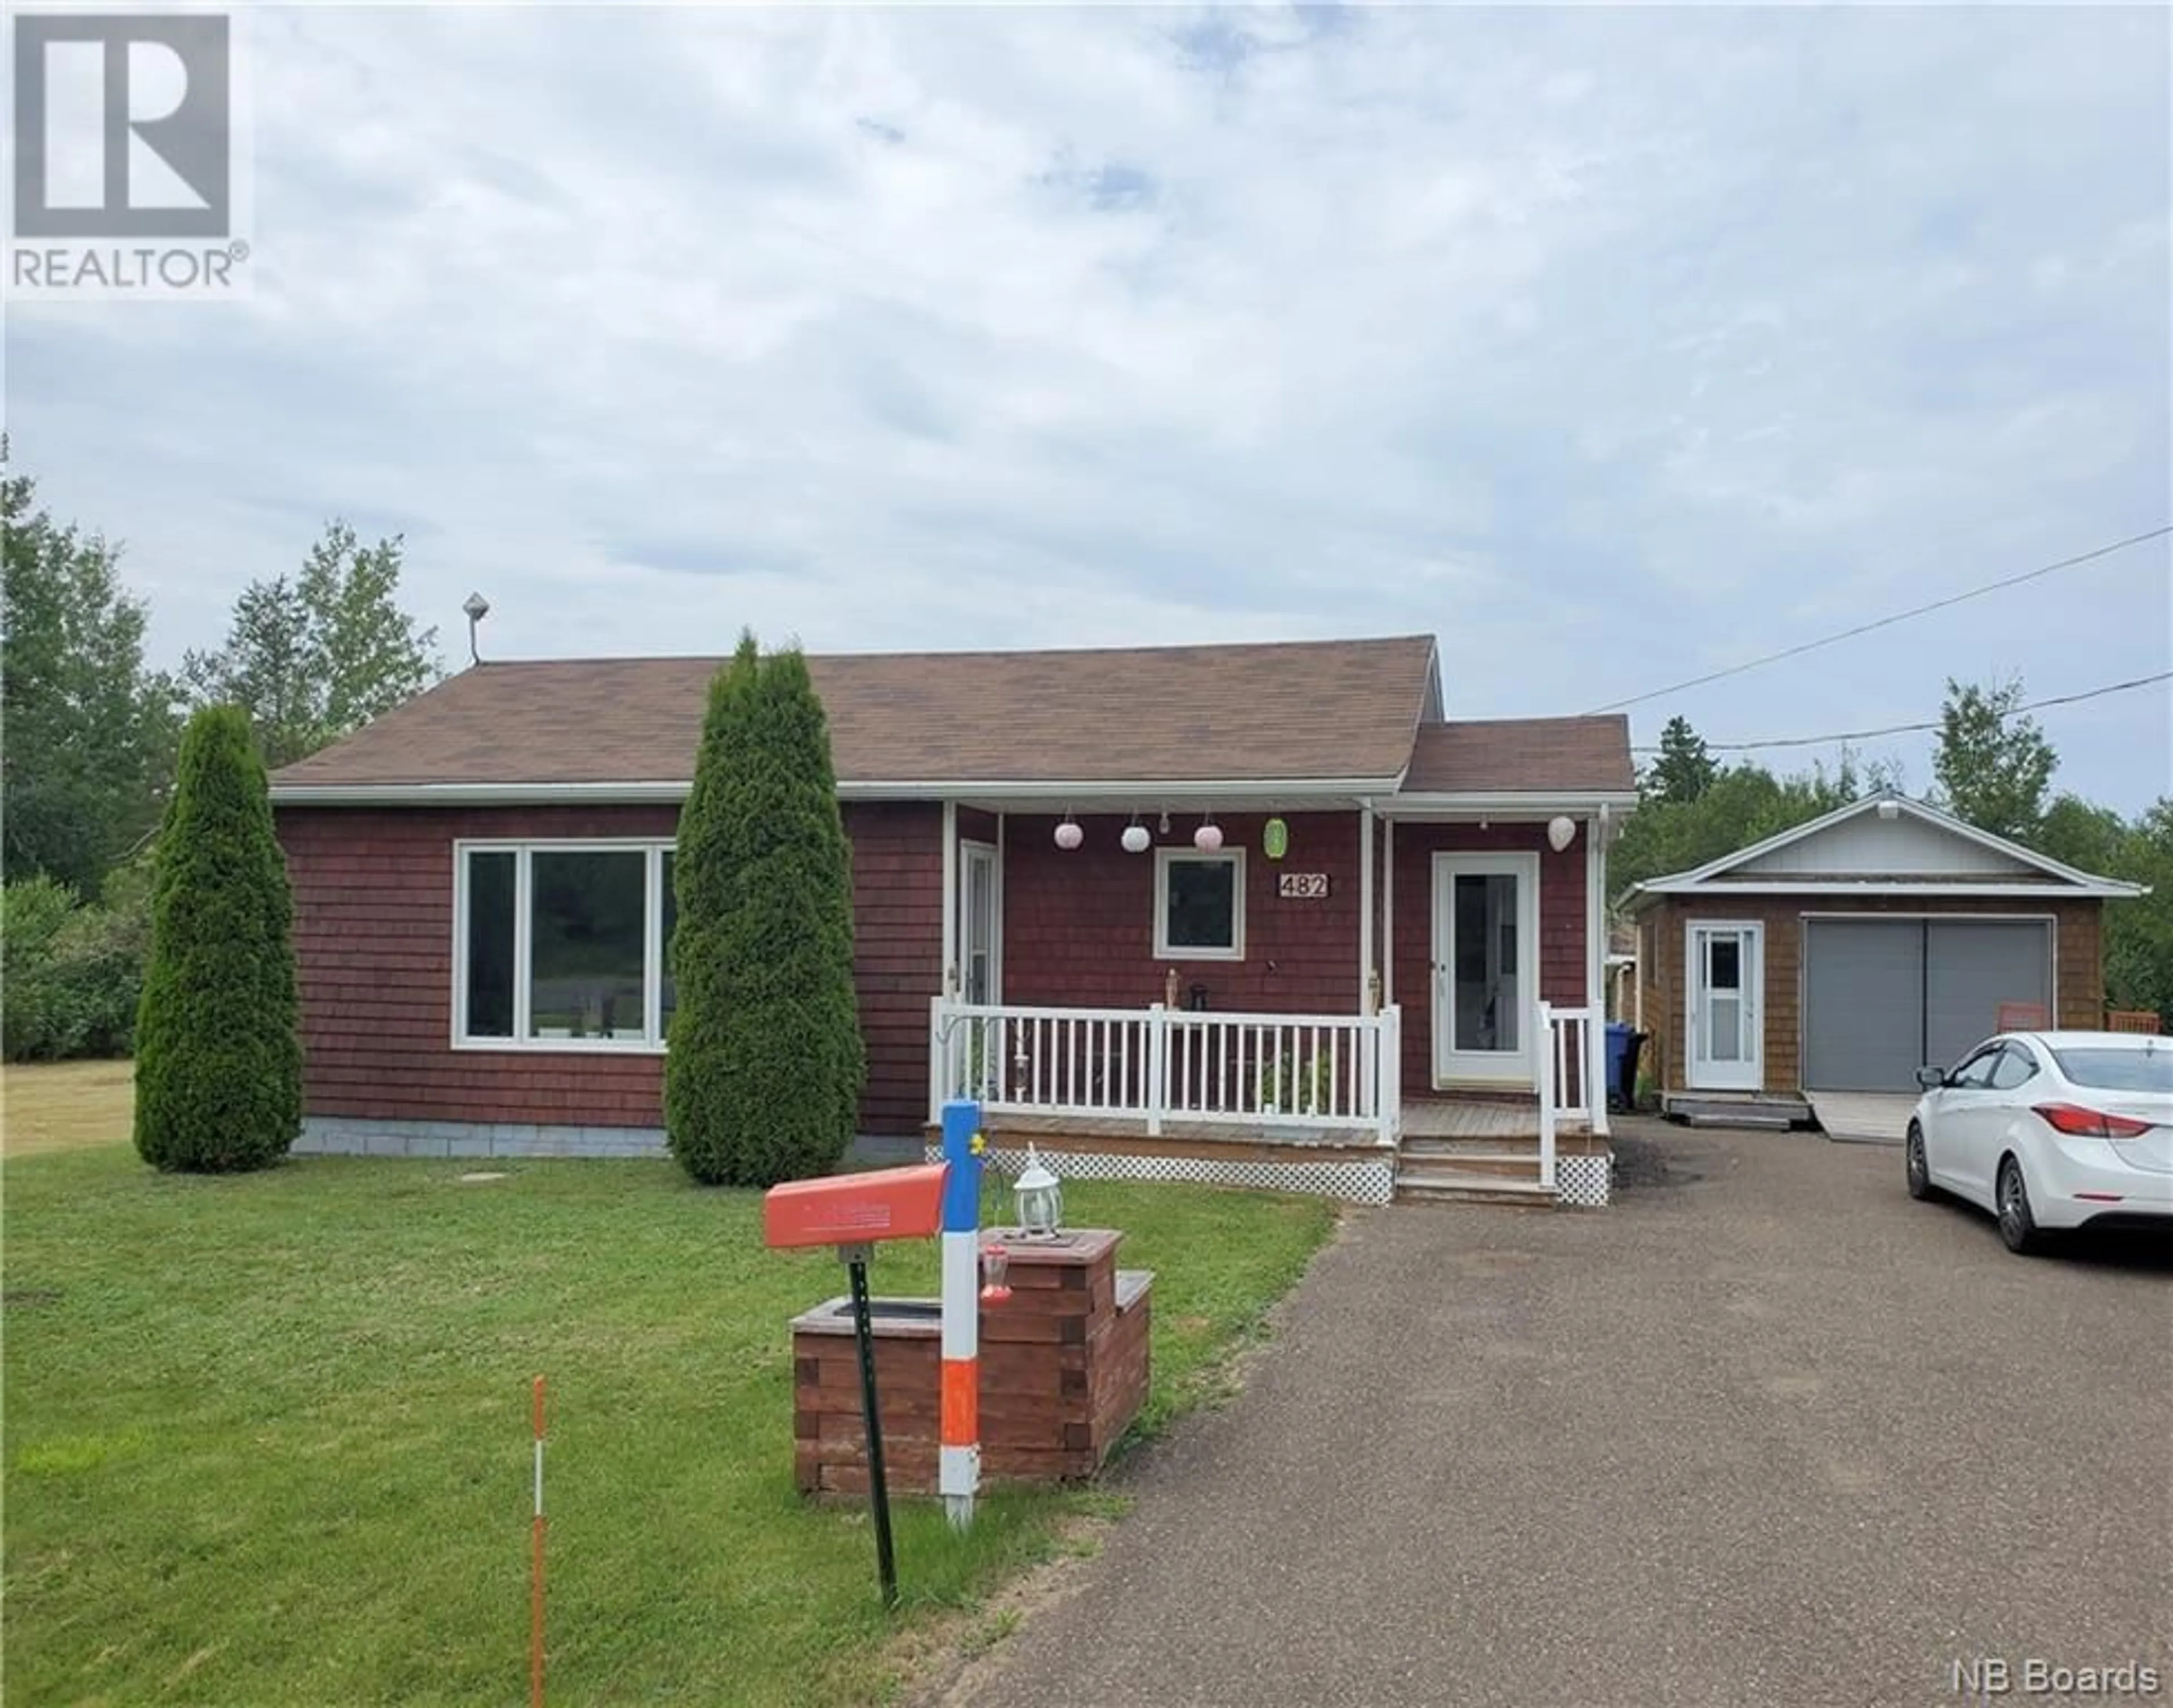 Home with unknown exterior material for 482 Chemin Mallais, Duguayville New Brunswick E8M1L8